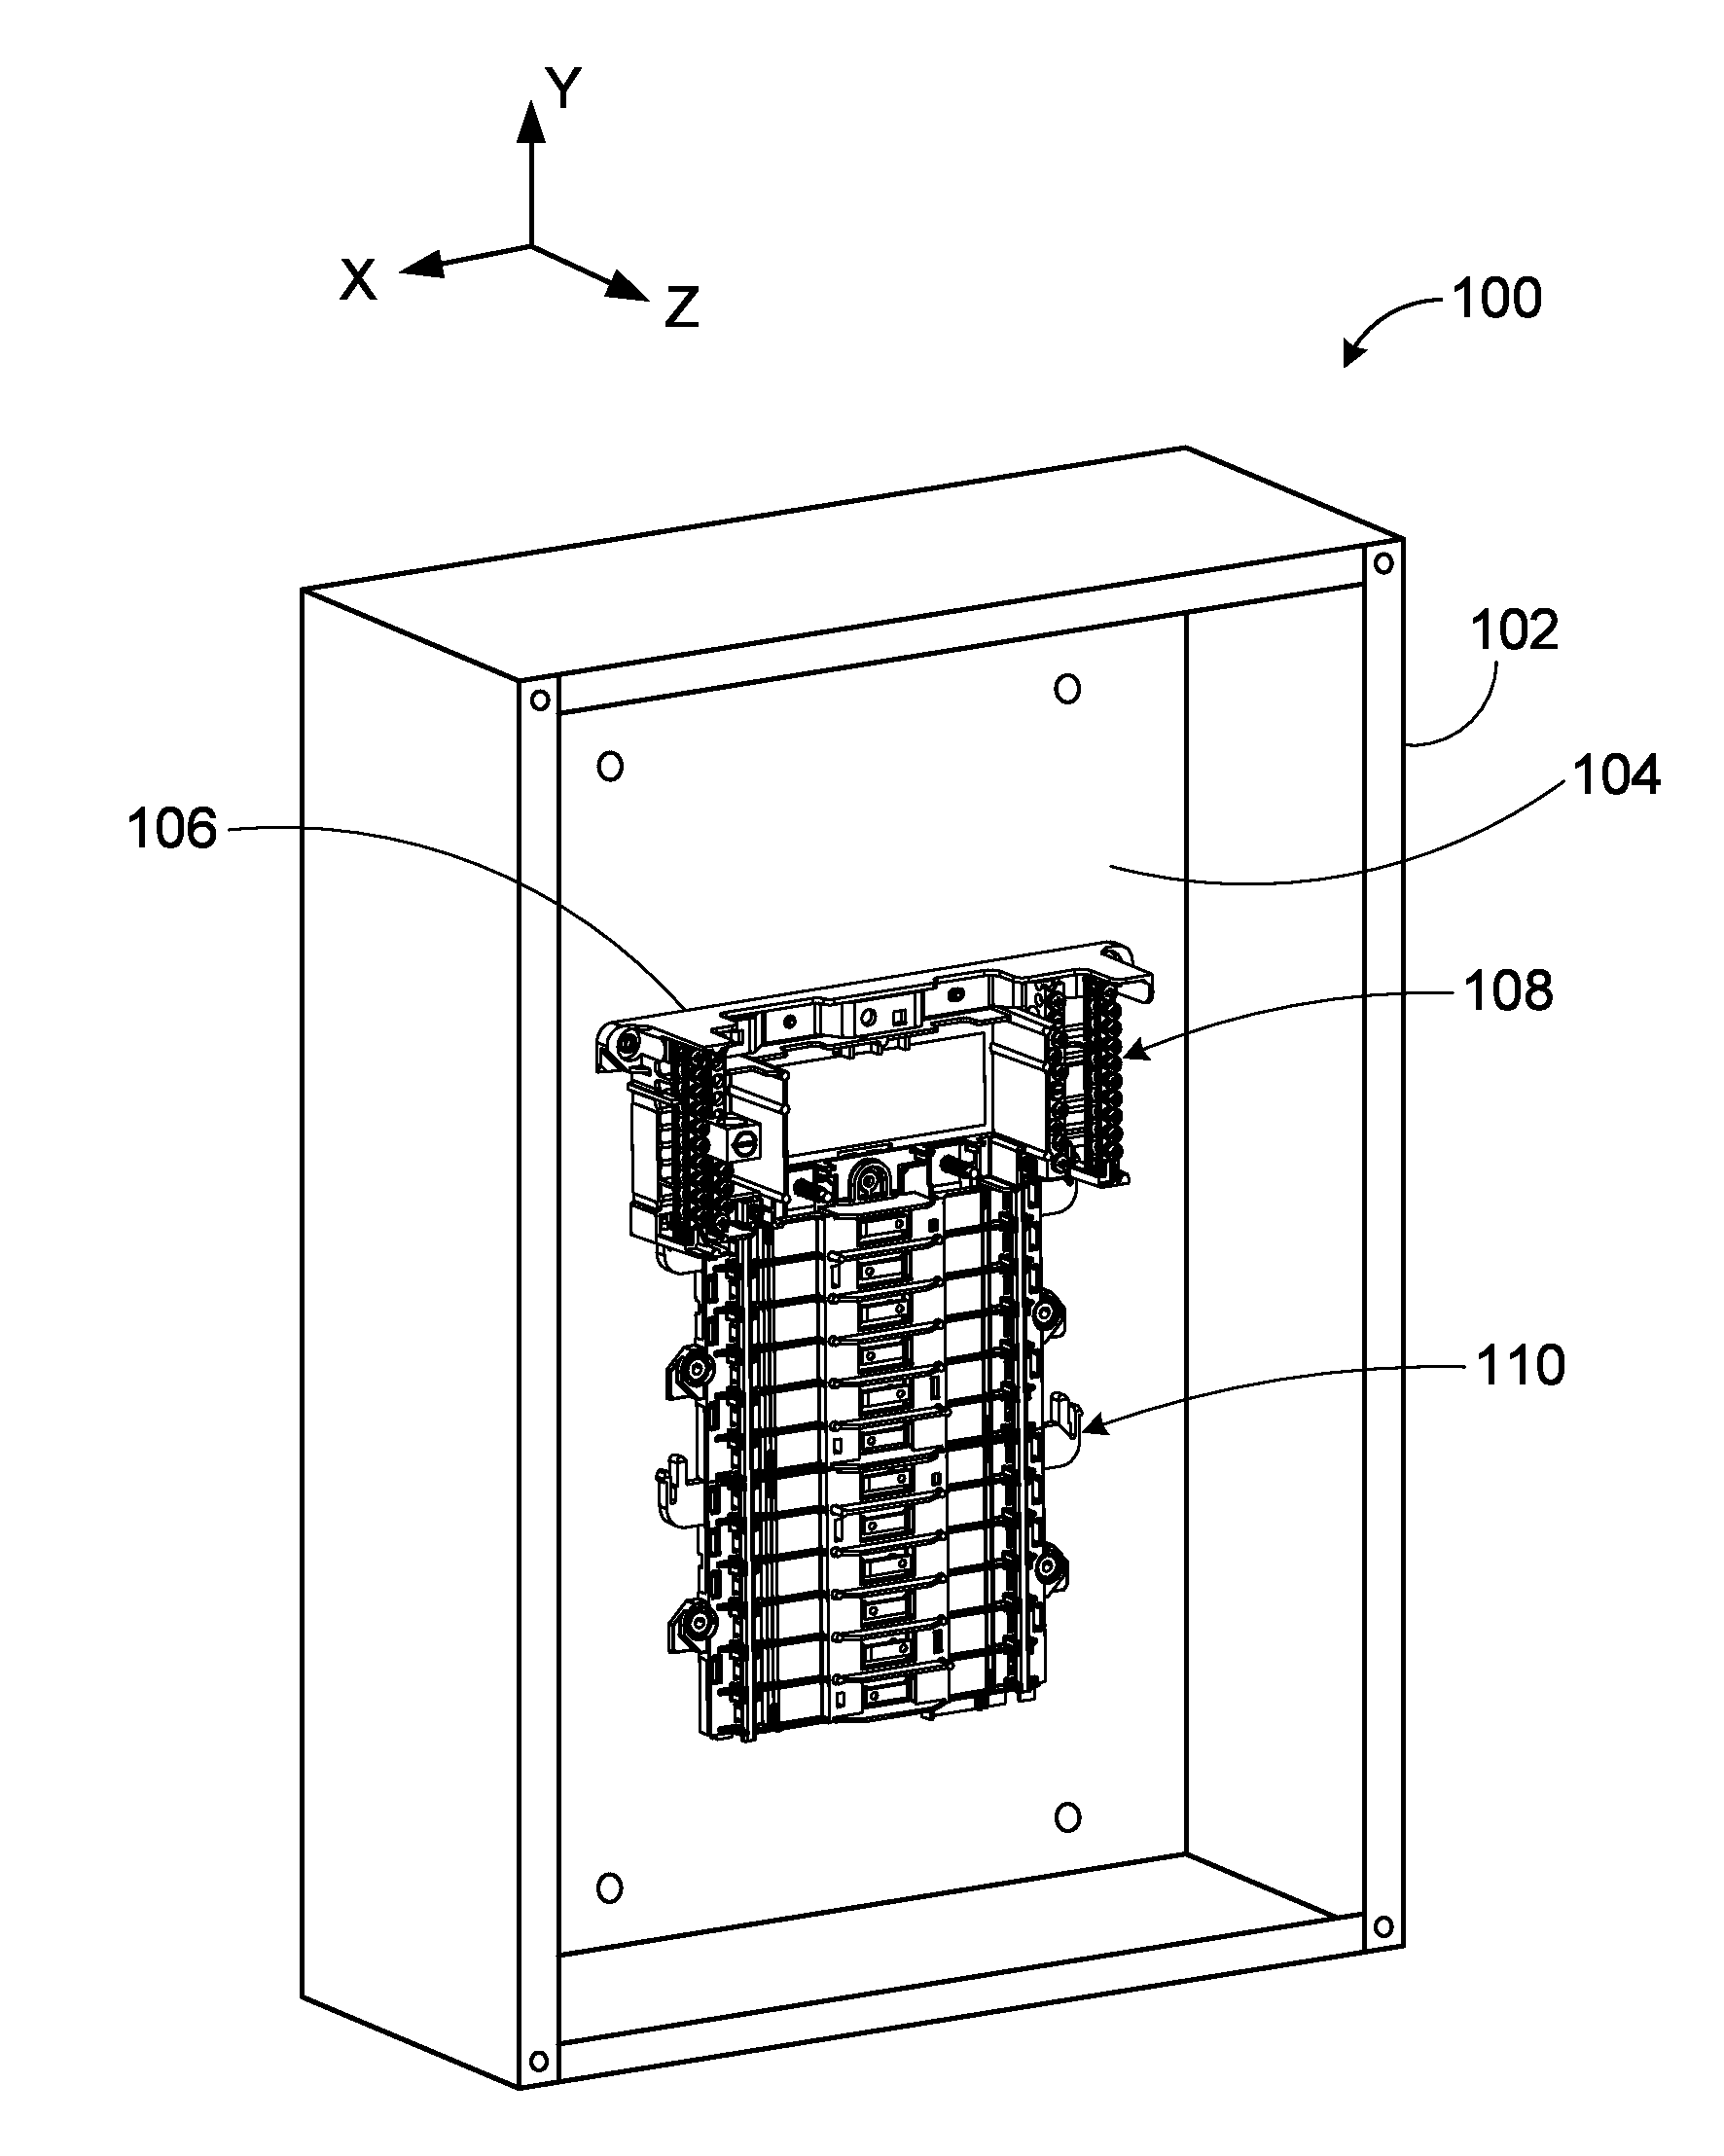 Plug-on neutral load center having a rotating neutral rail retained by a two-piece dielectric barrier